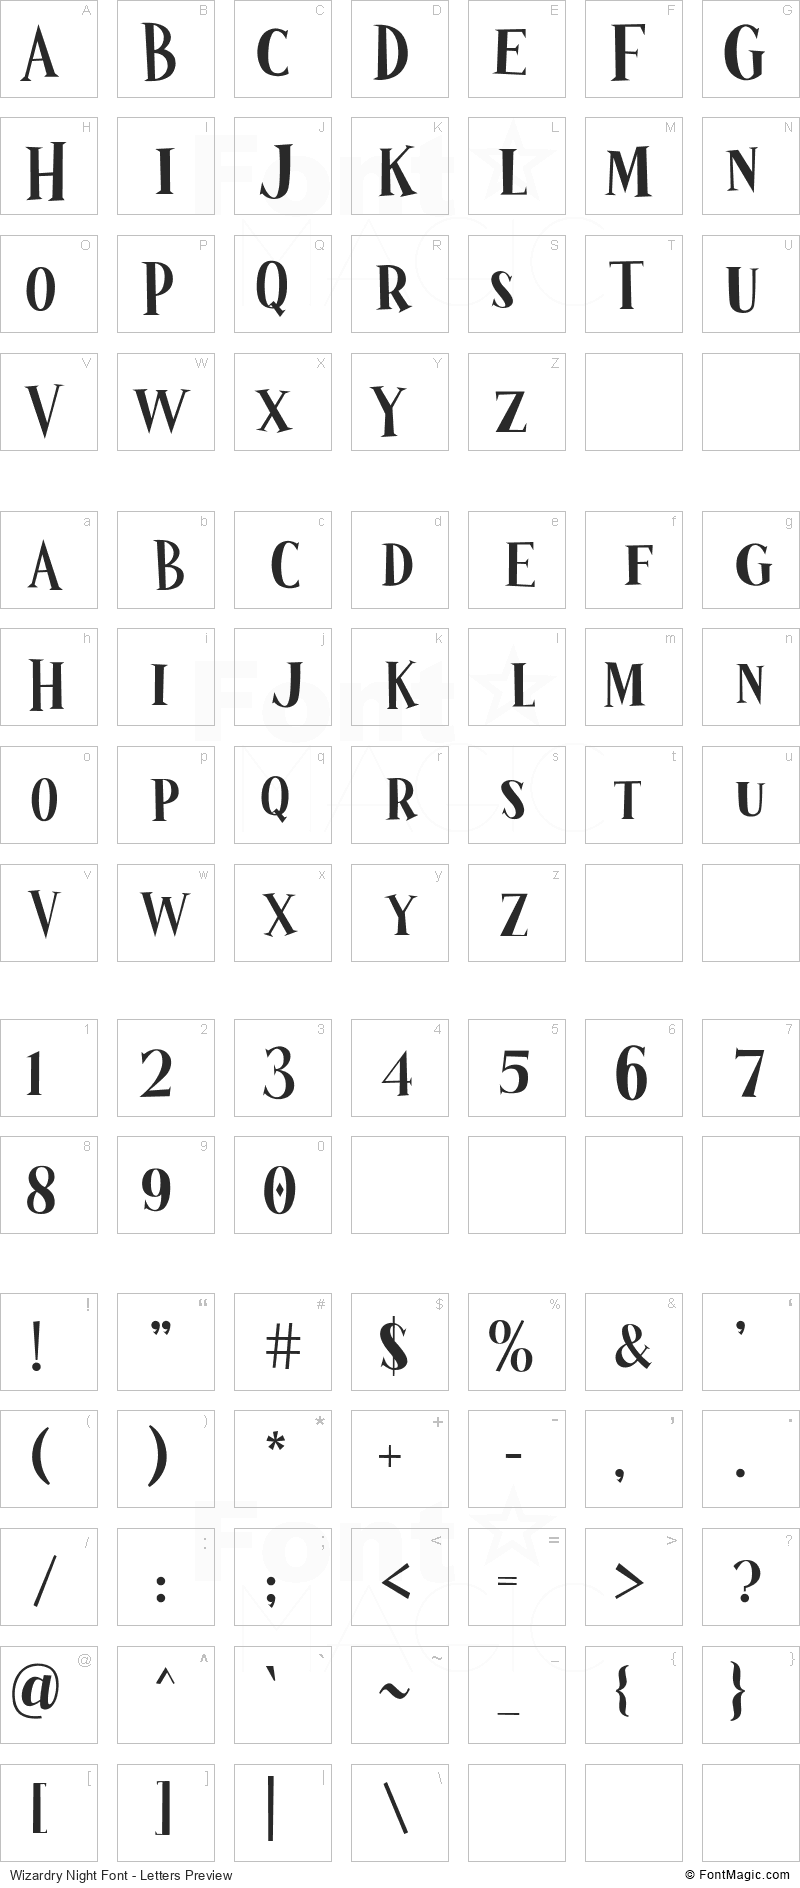 Wizardry Night Font - All Latters Preview Chart